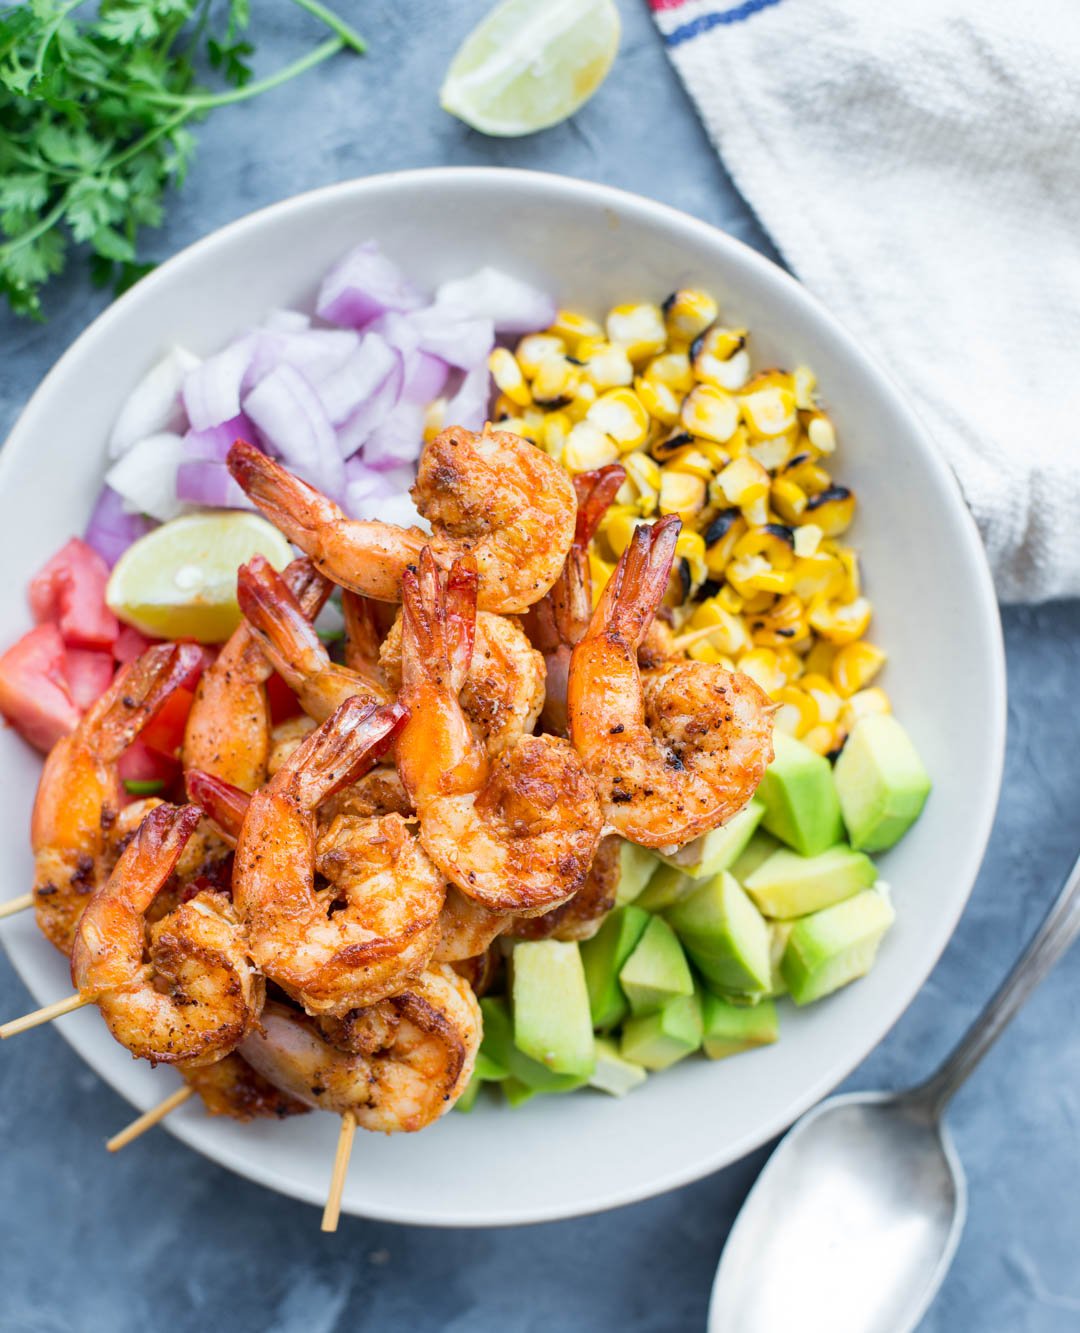 Grilled Shrimp with Corn Avocado Salad is a refreshing salad for warm summer days. Spicy grilled shrimp paired with grilled corn, avocado and other veggies takes only 15 minutes of your time.